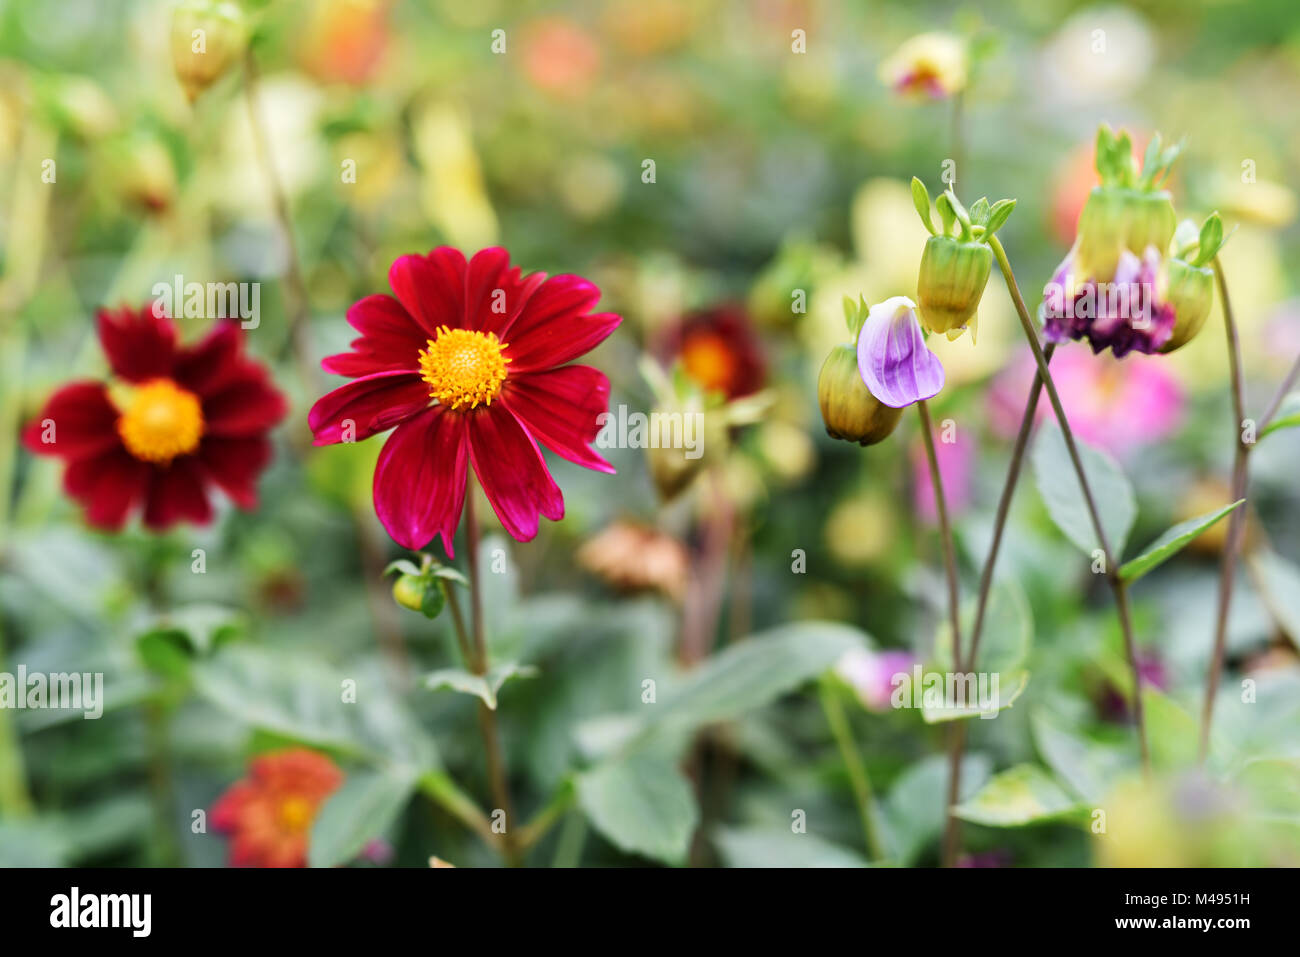 Bright flowers color close-up city streets Stock Photo